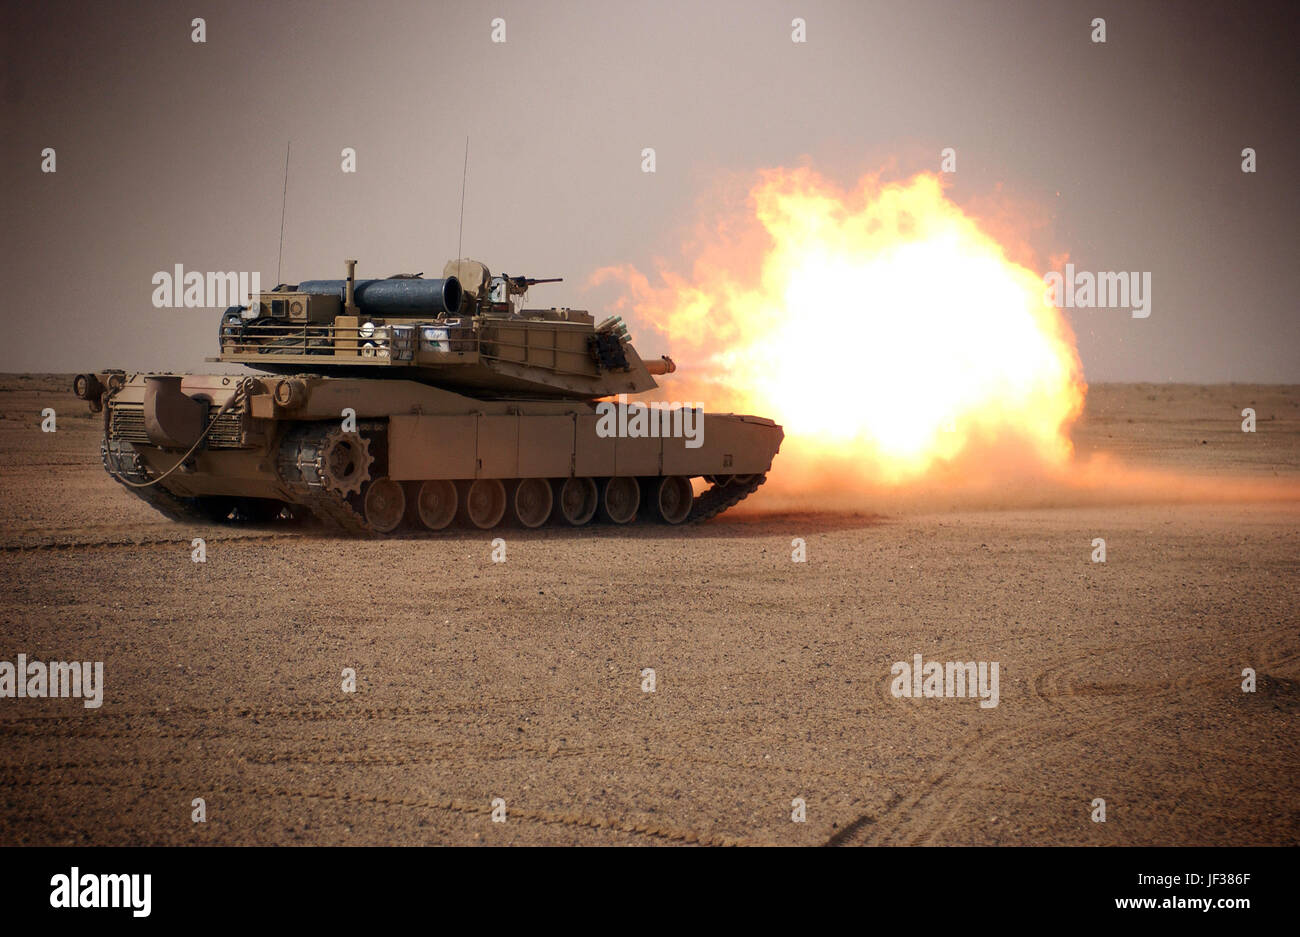 050124-M-8479B-004 U.S. Marines fire the main gun of their M1A1 Abrams tank in the western desert of the Najaf Province of Iraq during a training exercise on Jan. 24, 2005.  The Marines, assigned to Tank Platoon, Battalion Landing Team 1st Battalion, 4th Marines, 11th Marine Expeditionary Unit Special Operations Capable train monthly to maintain proficiency.  DoD photo by Gunnery Sgt. Robert K. Blankenship, U.S. Marine Corps.  (Released) Stock Photo